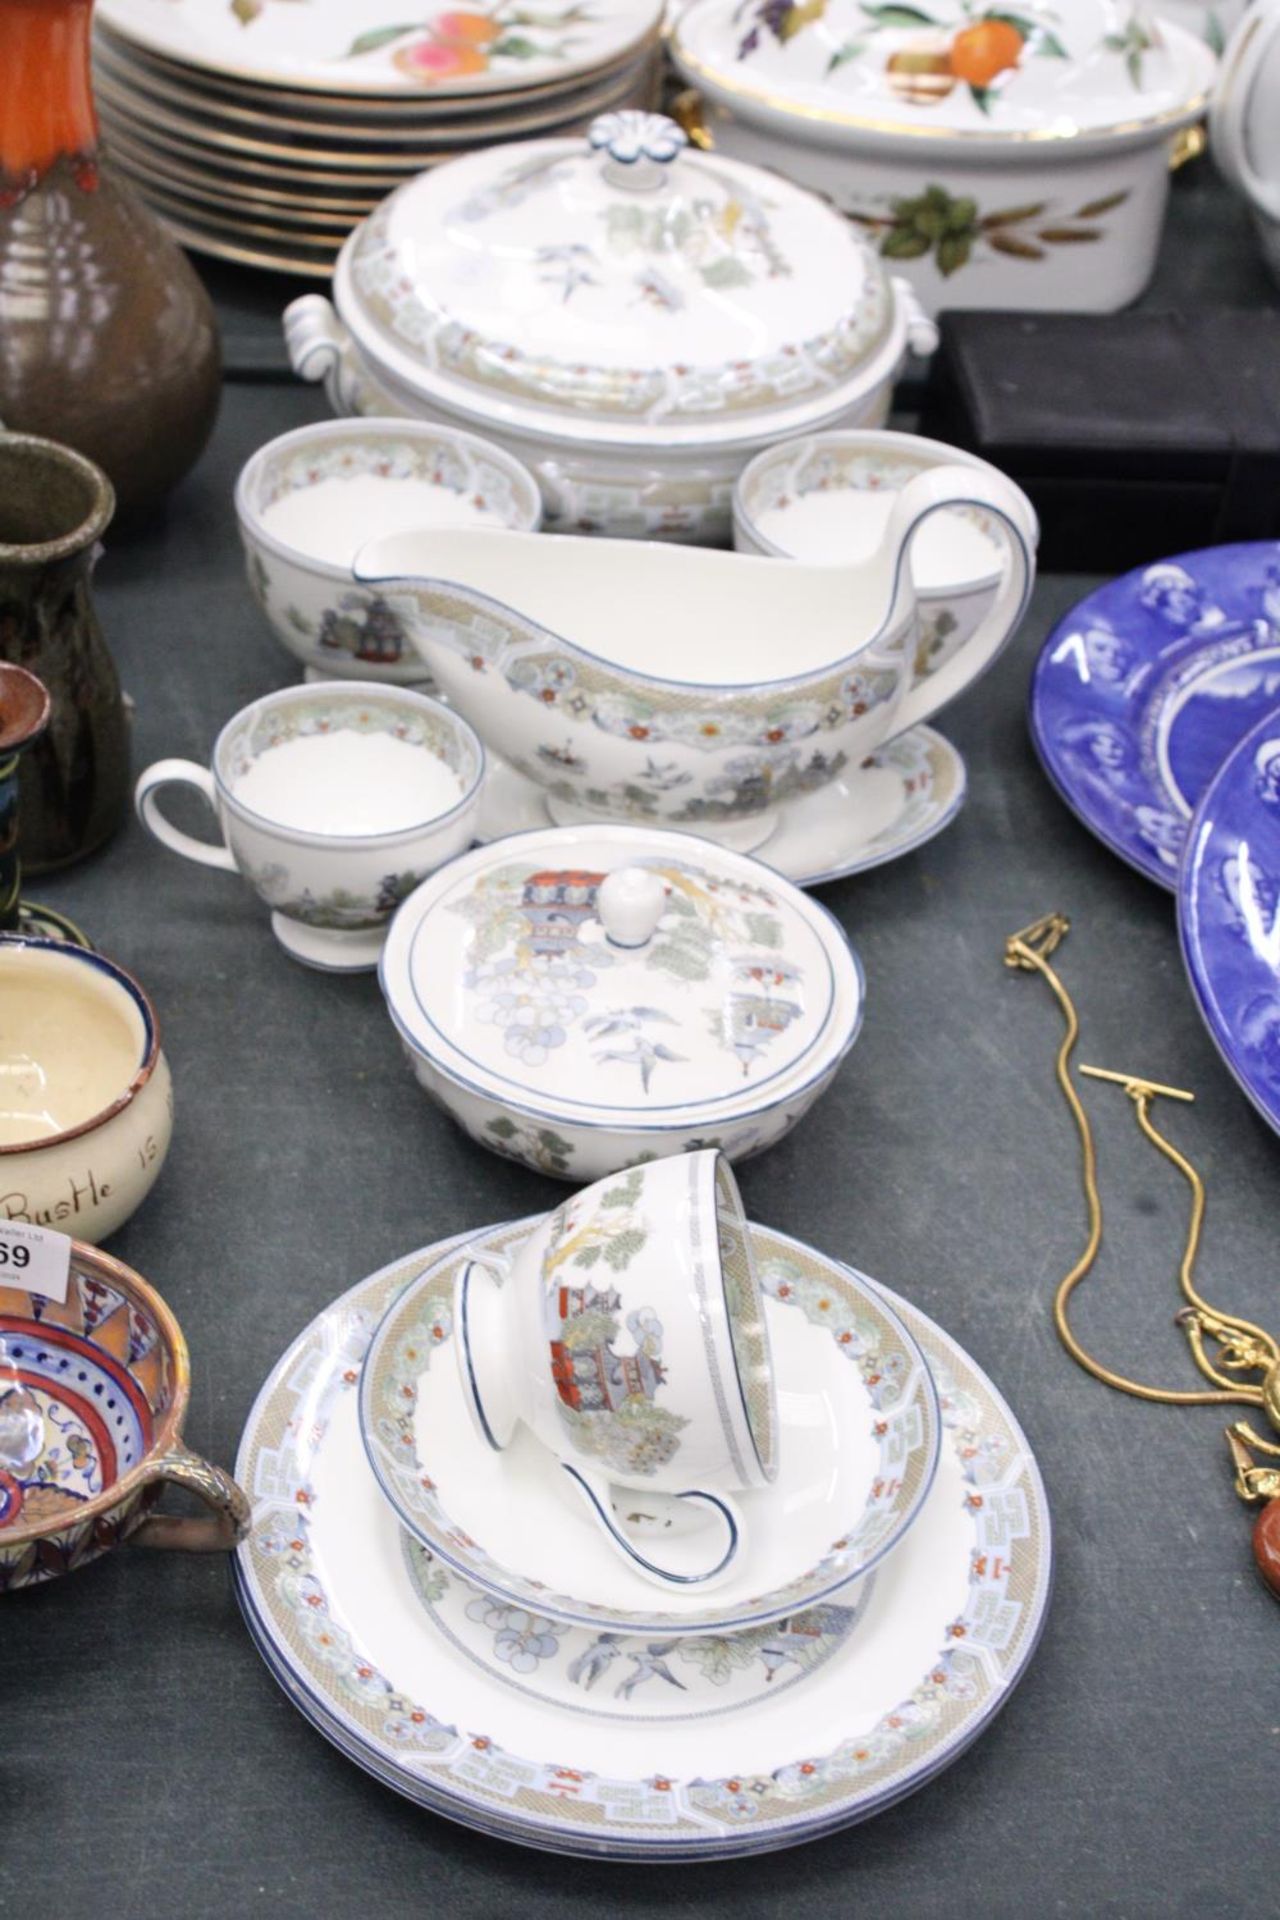 A PART ORIENTAL STYLE WEDGWOOD DINNER SERVICE TO INCLUDE A GRAVY JUG, CUP, PLATES ETC